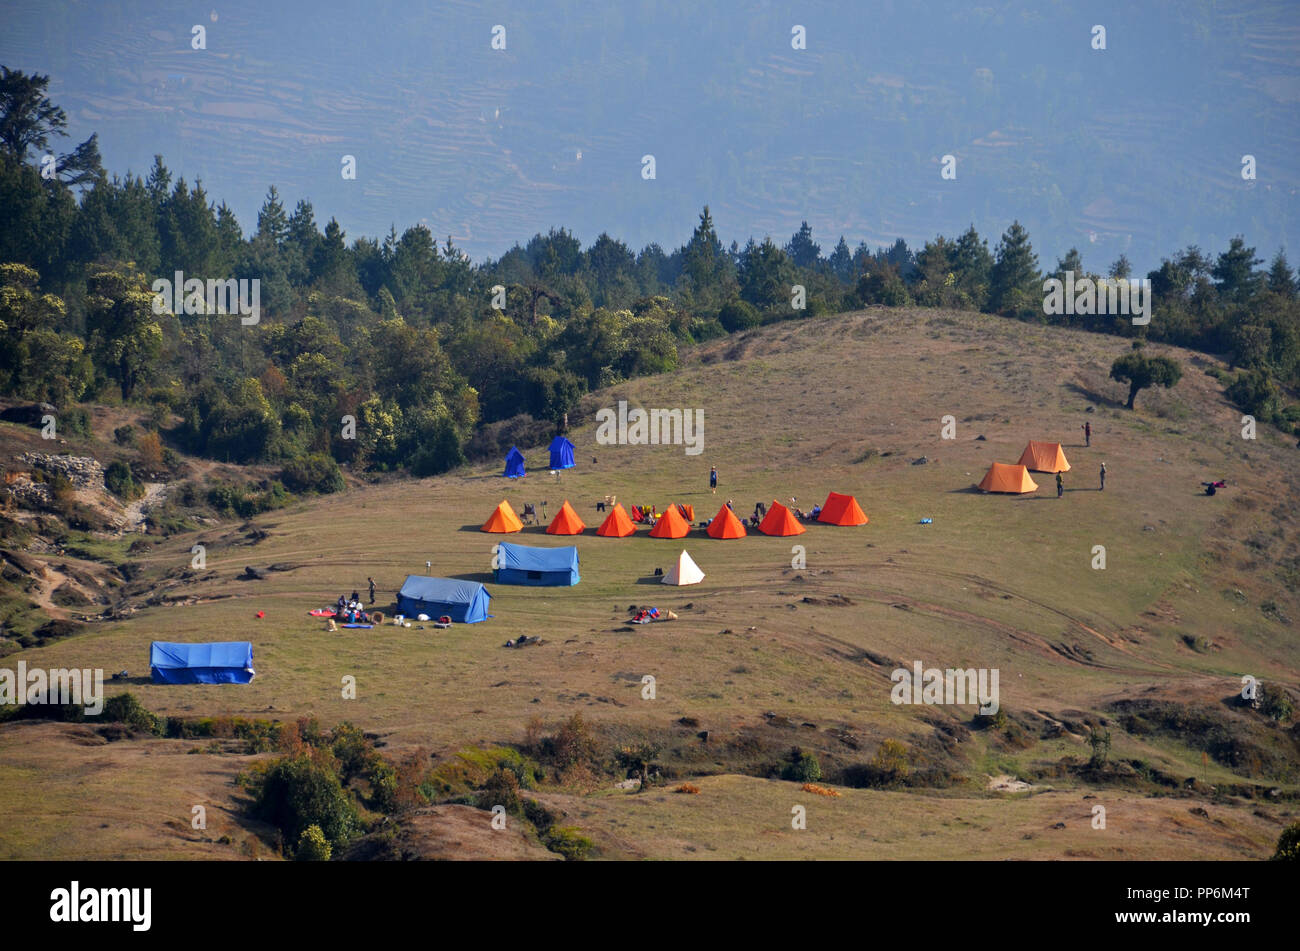 A tourist camp set up in the countryside above the village of Nele, Solukhumbu, Nepal Stock Photo